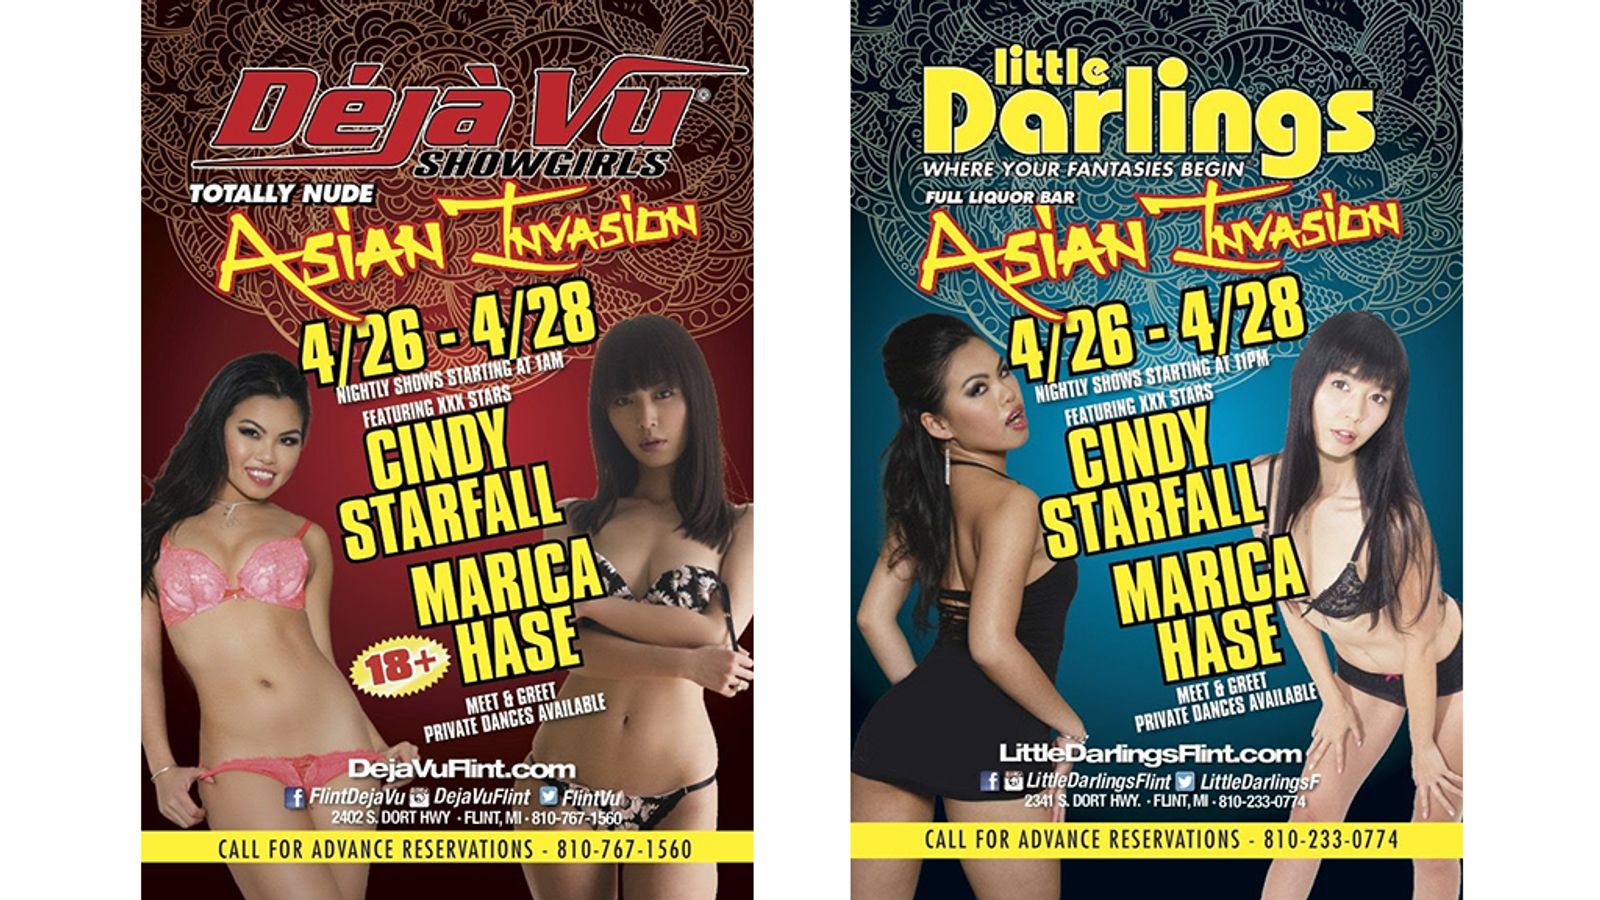 Cindy Starfall & Marica Hase To Feature At Flint, MI Clubs